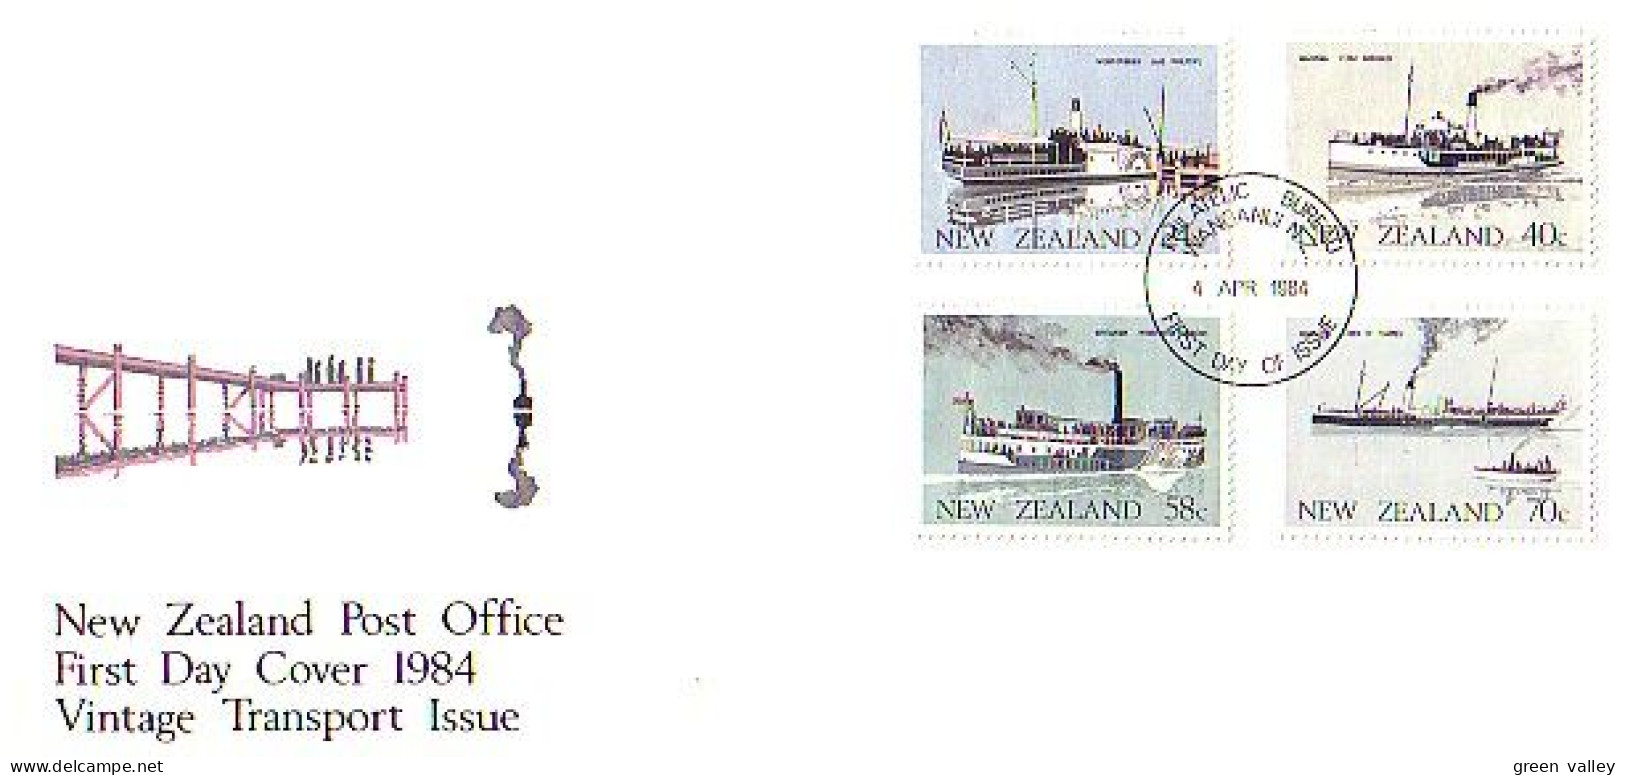 New Zealand Bateaux Transbordeurs Ferry Boats Ferries FDC Cover ( A80 140b) - Sonstige (See)